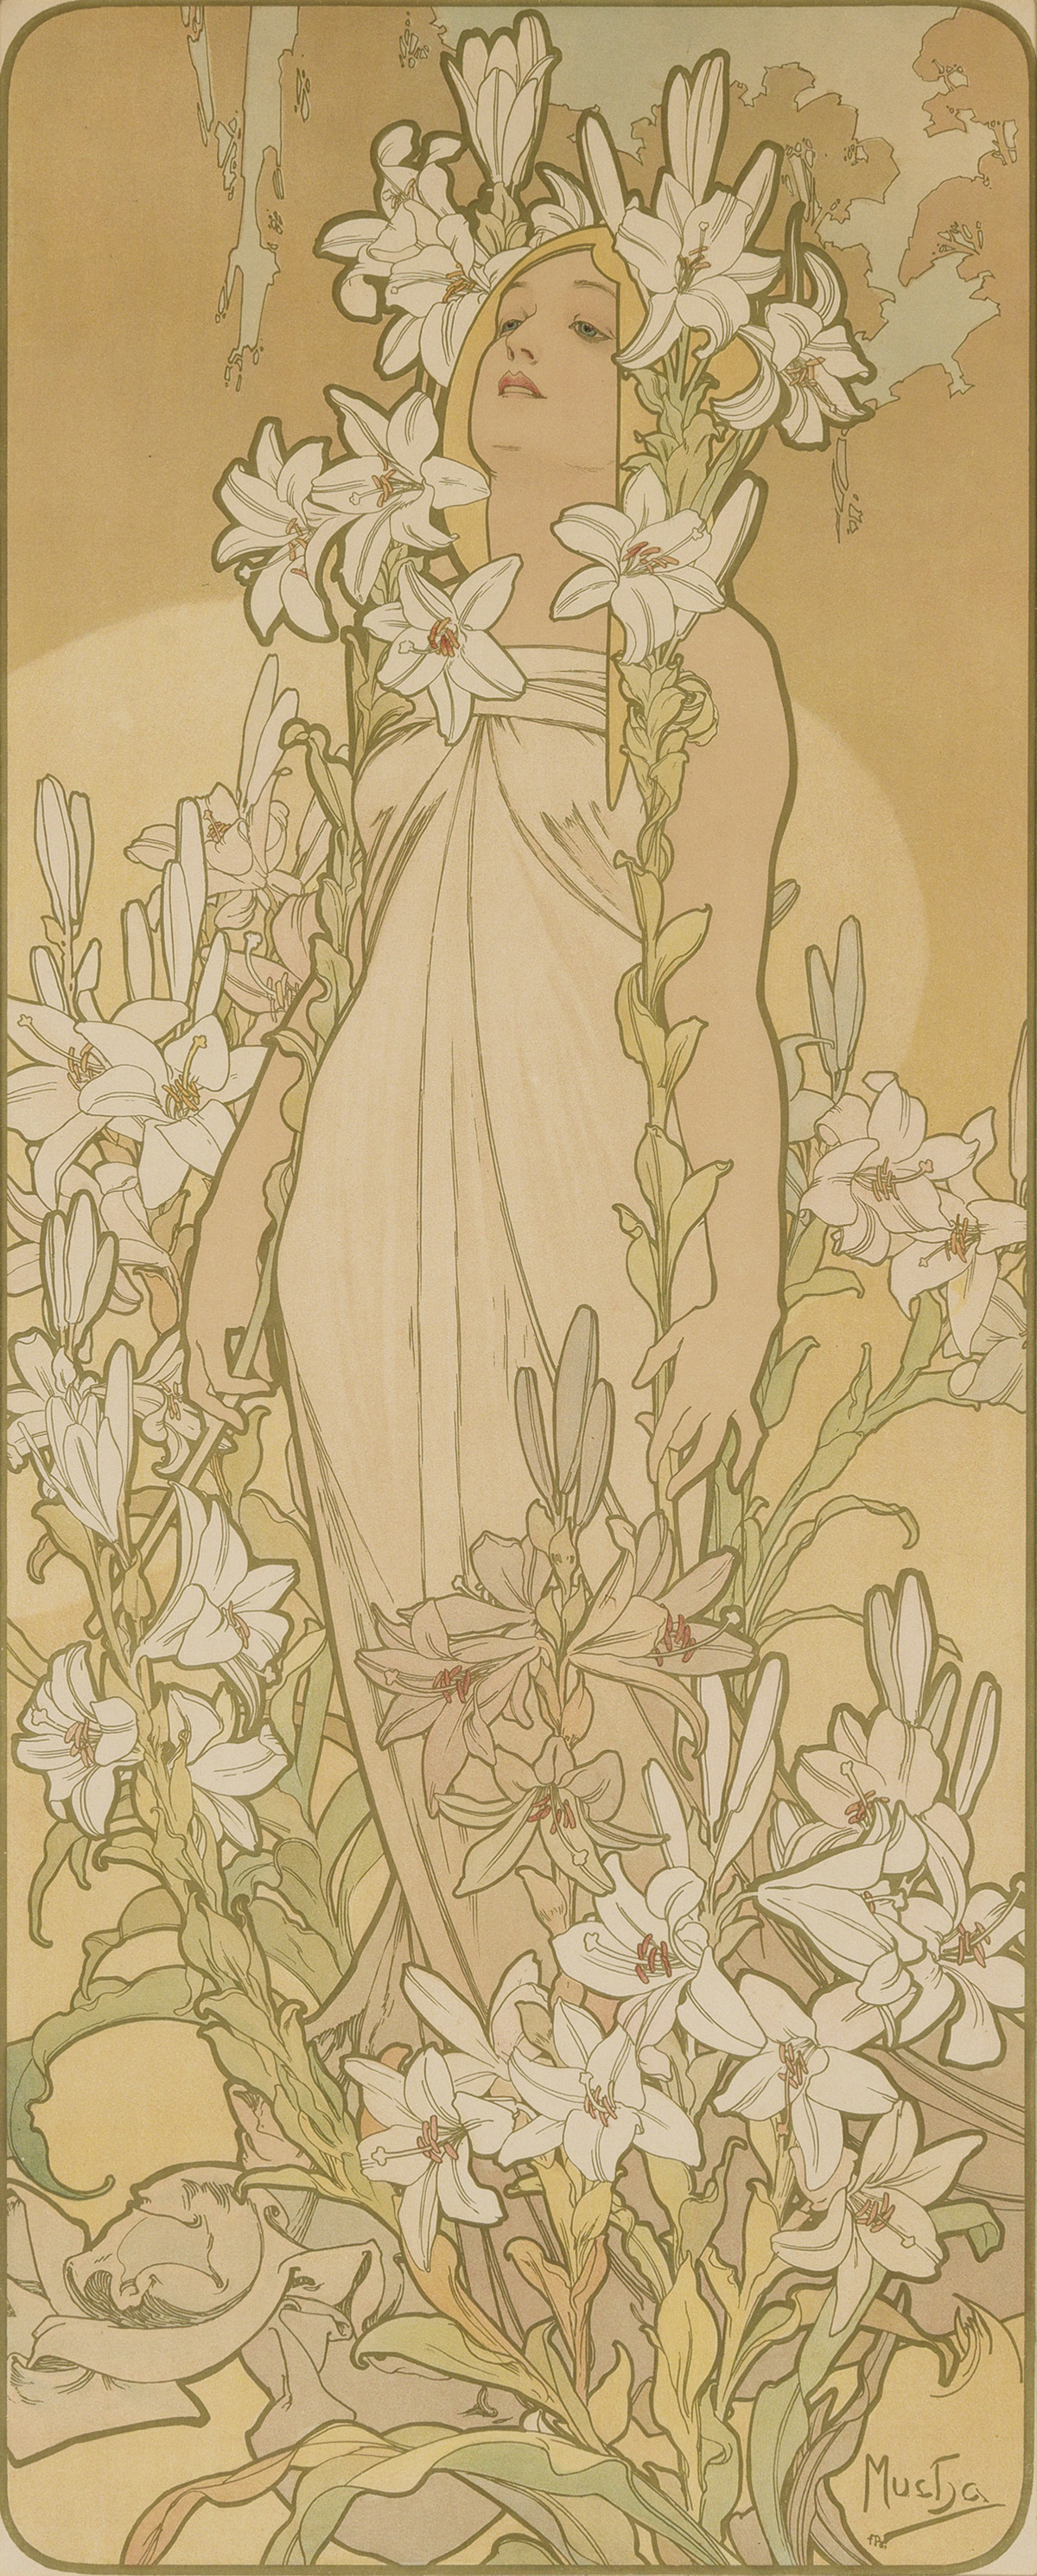 ALPHONSE MUCHA (1860-1939). [THE FLOWERS.] Group of 3 decorative panels. 1898. 40x16 inches, 101x42 cm. [F. Champenois, Paris.]